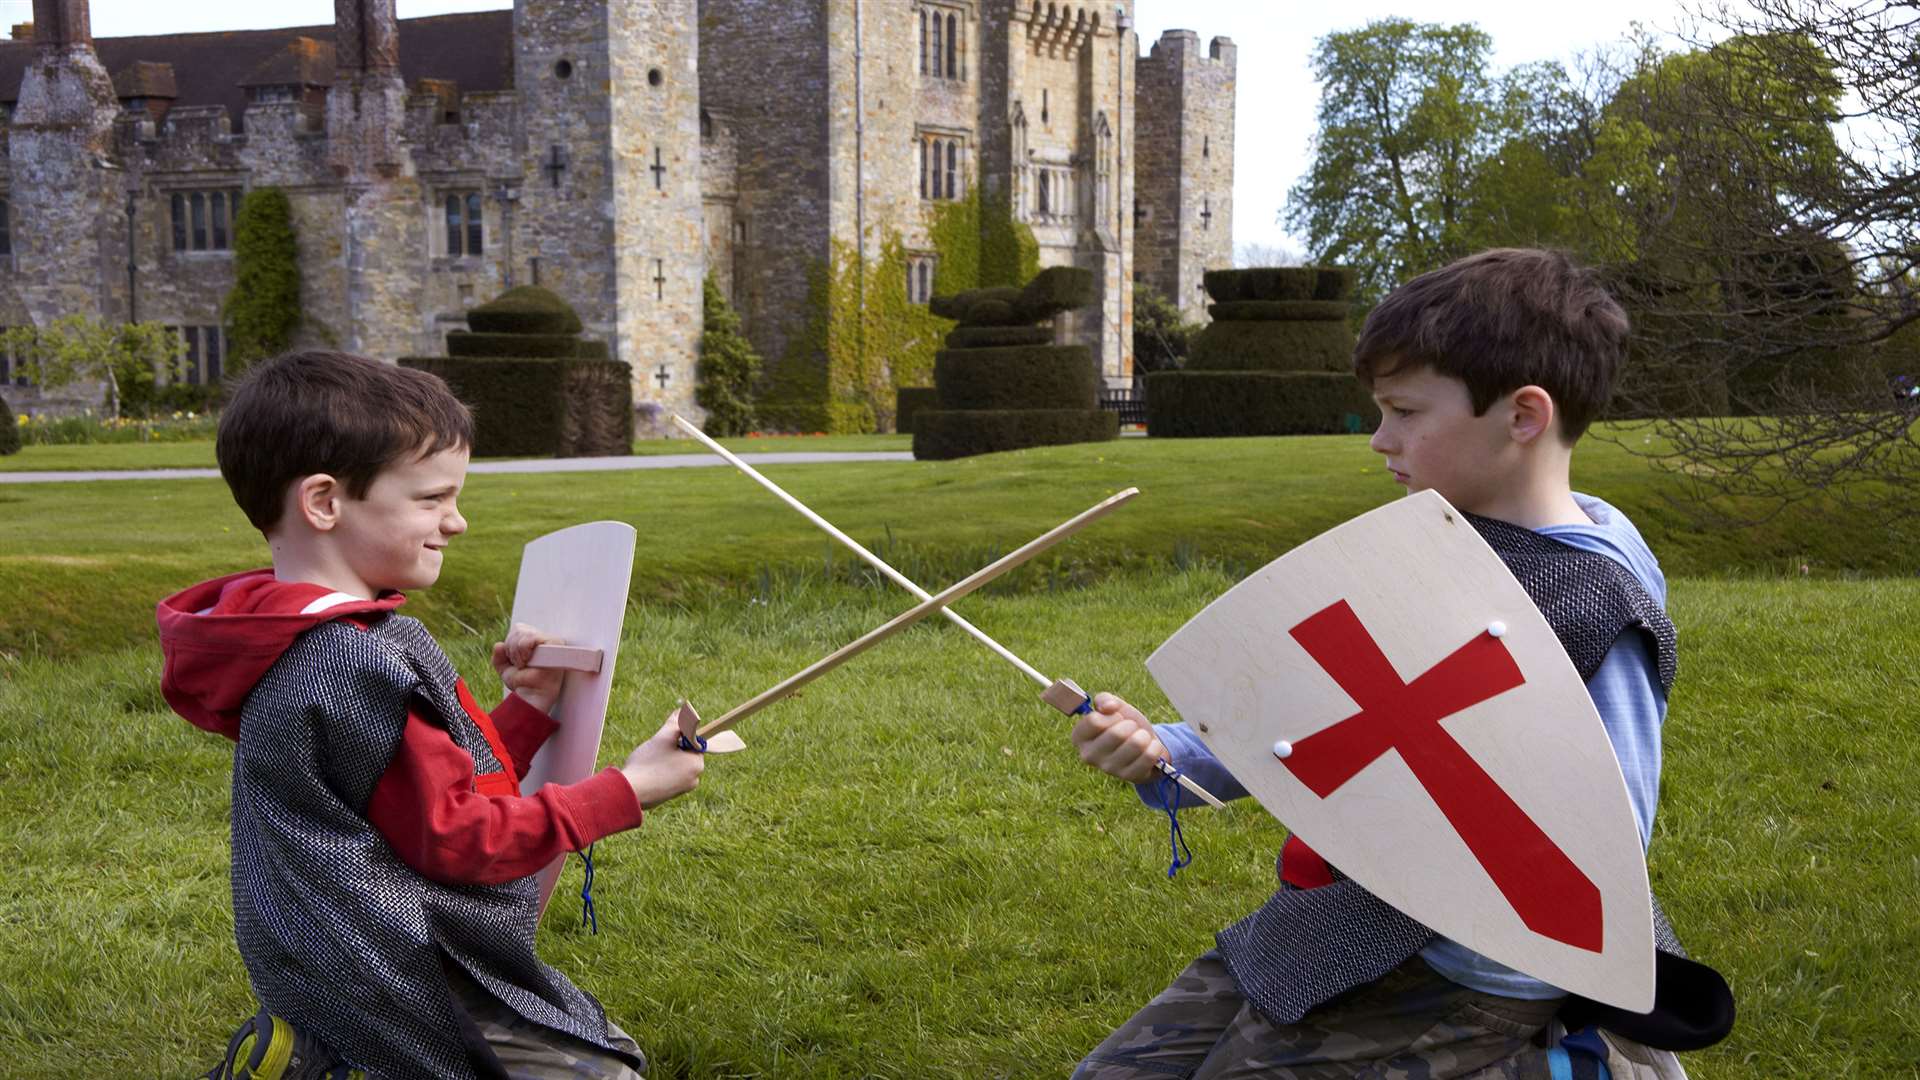 Knights in training learn how to prepare and protect armour and discover the best way to arm and disarm their master before battle at Hever Castle